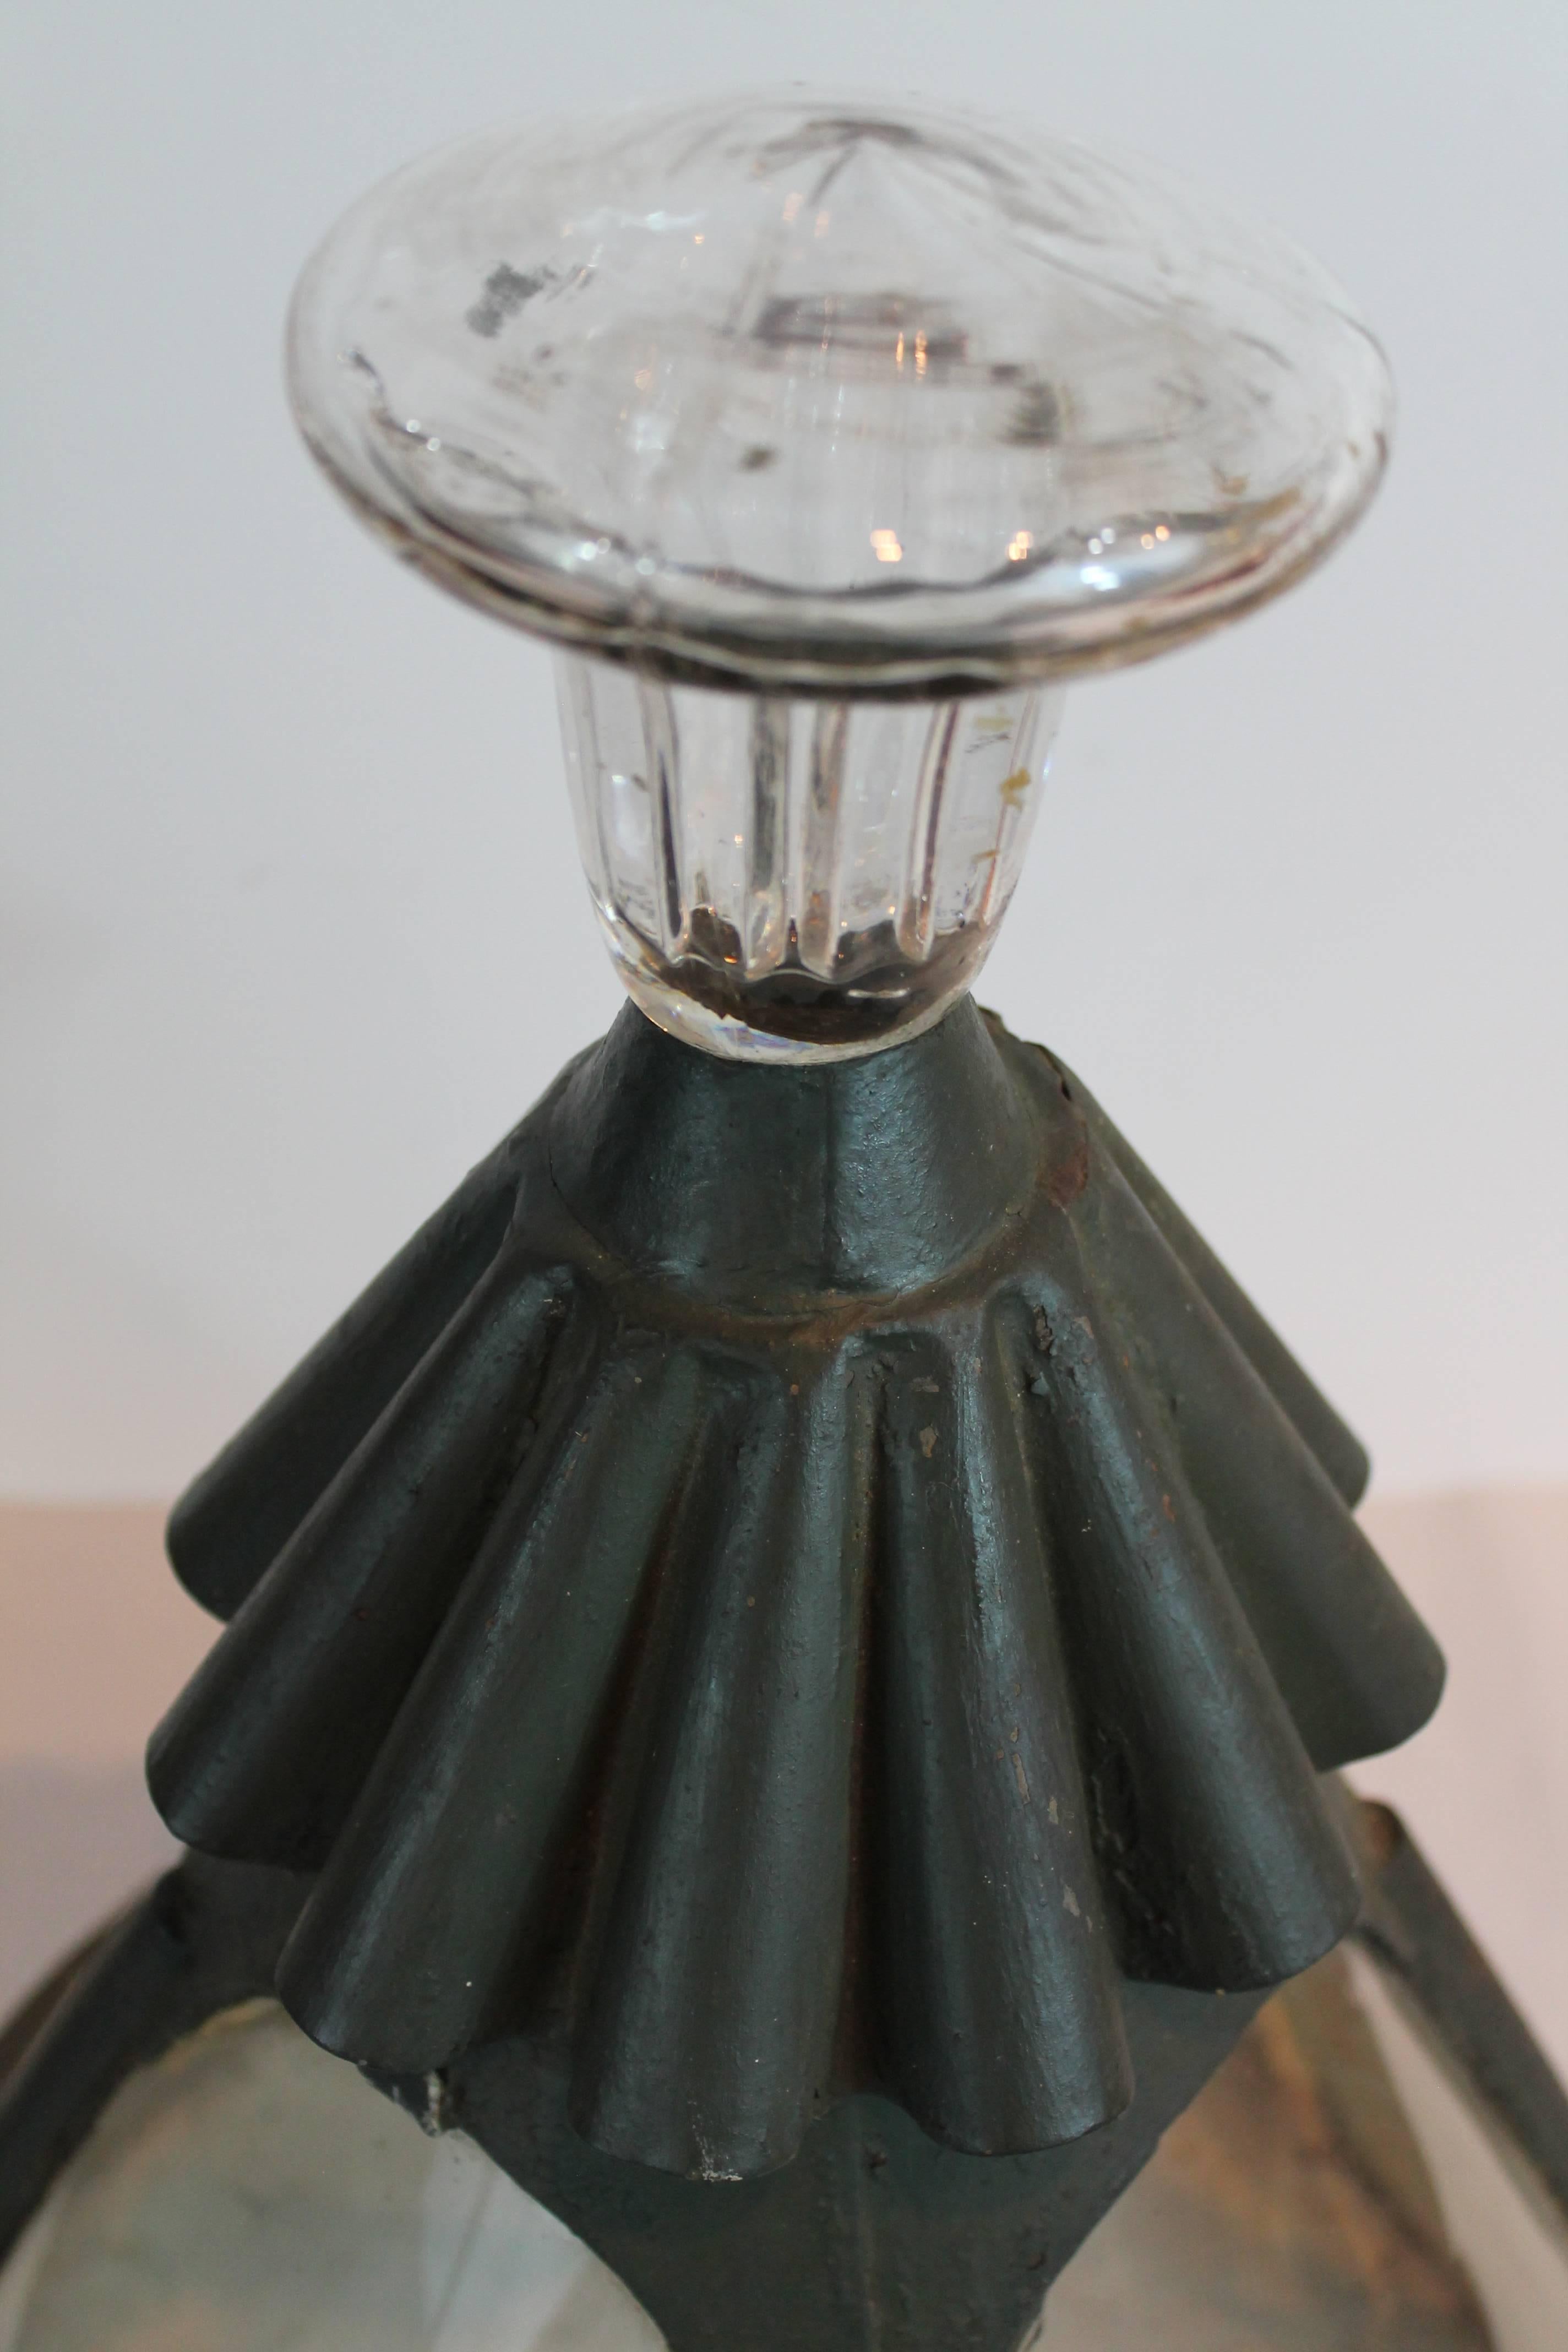 19th Century Flush Mount Fixture with Large Glass Finial In Good Condition For Sale In 3 Oaks, MI